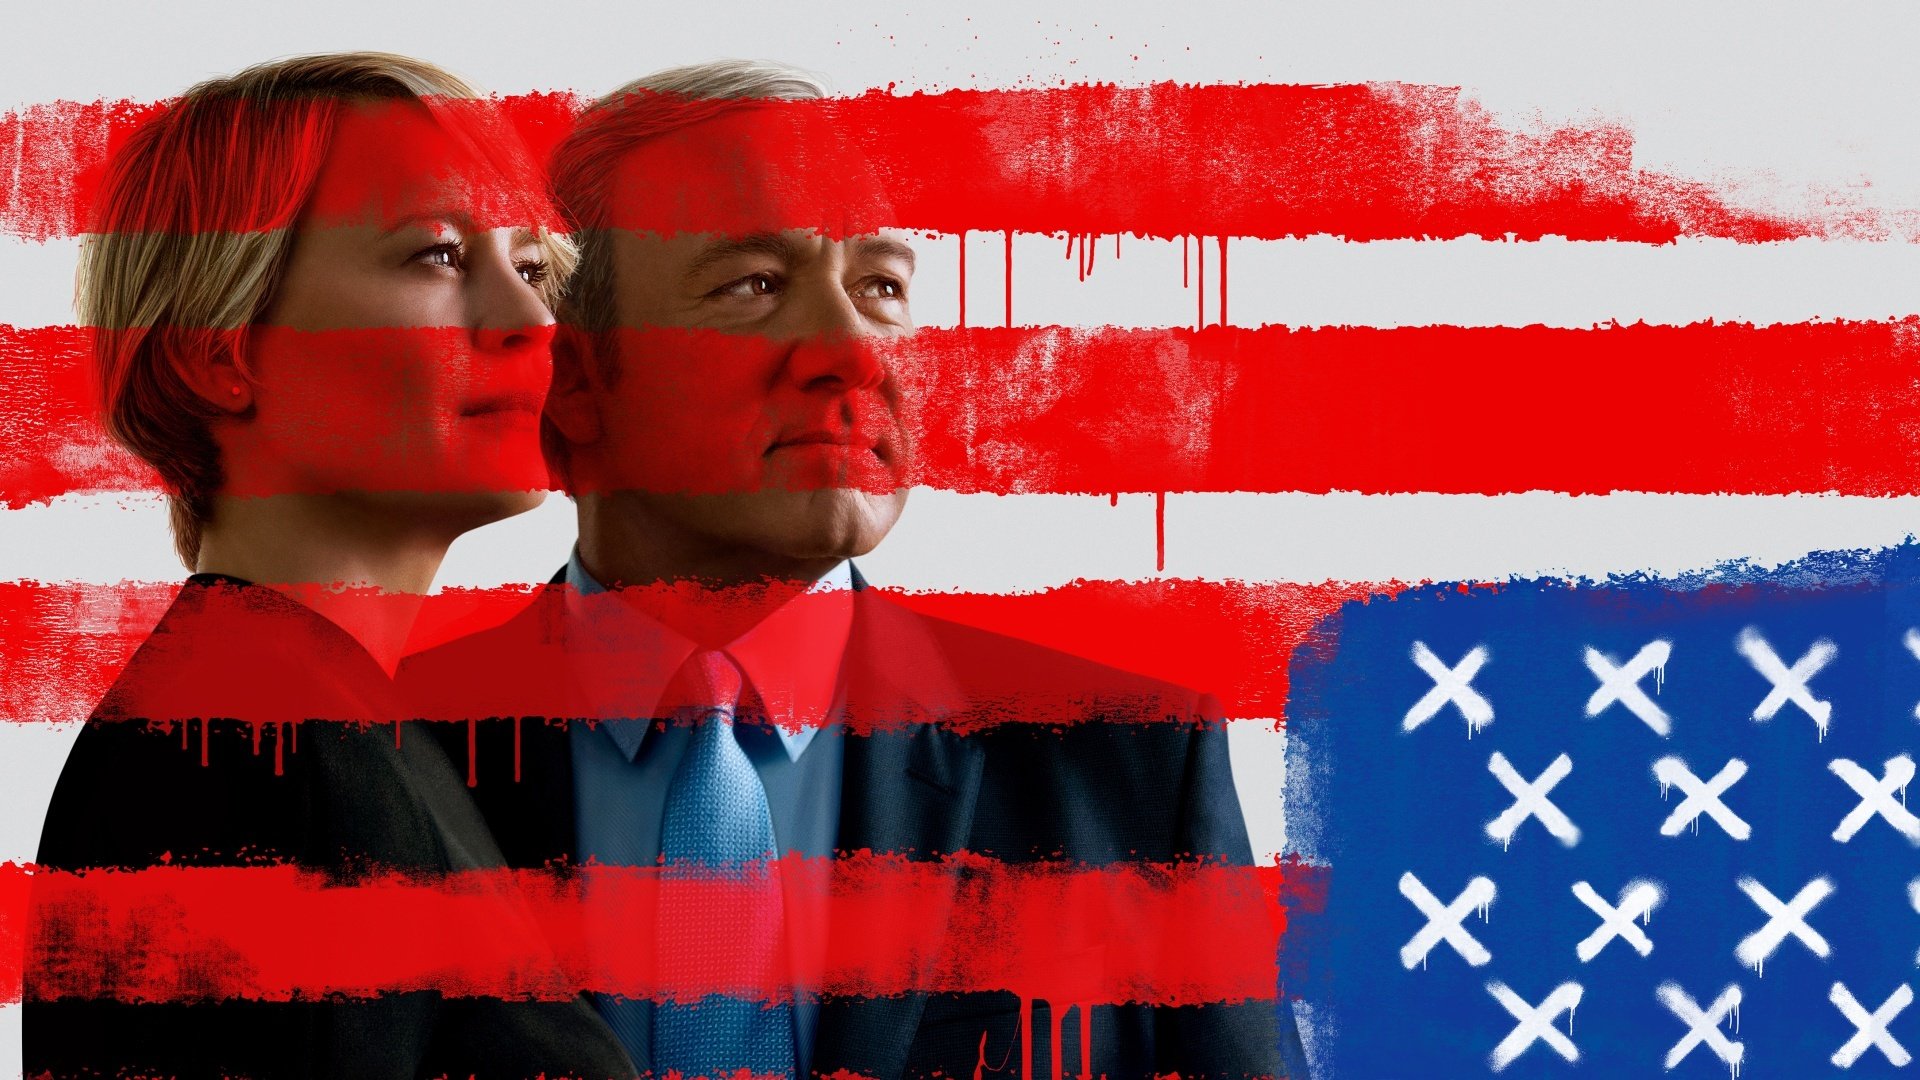 Wallpaper House of cards, TV show, Robin Wright, Kevin Spacey, poster